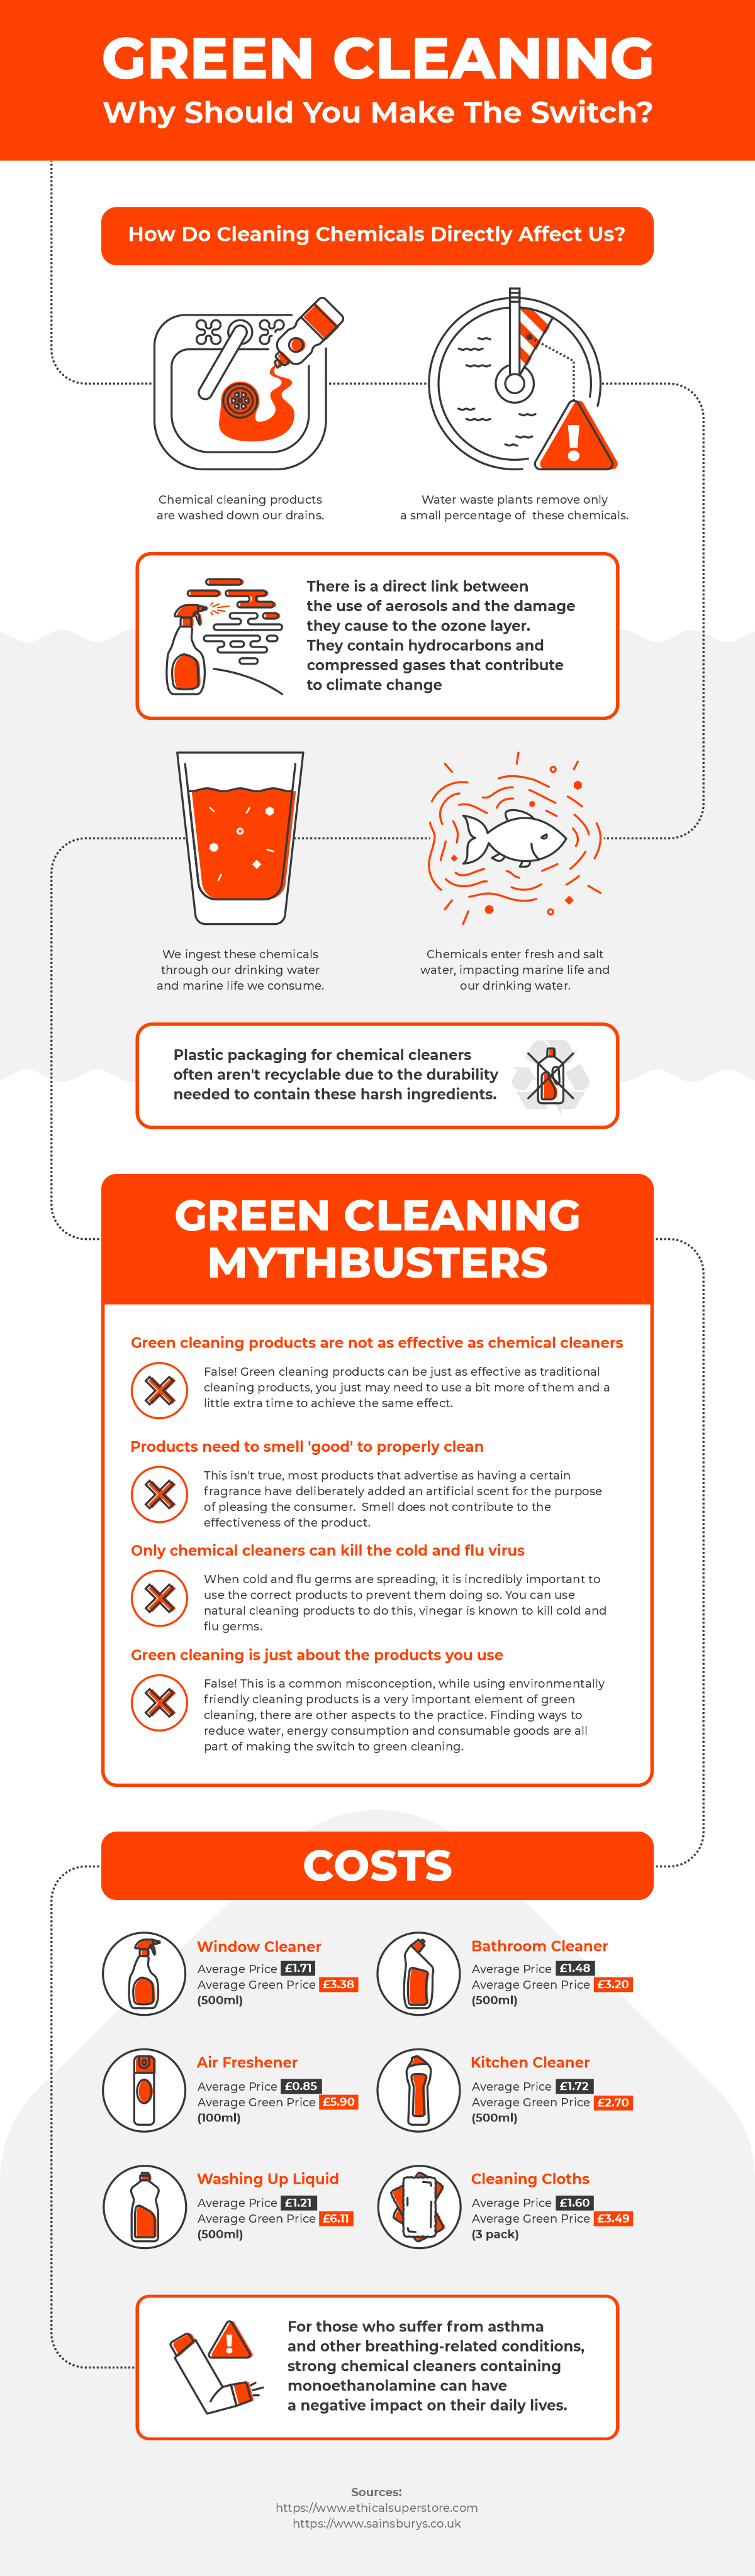 Why Companies Should Make The Switch To Green Cleaning